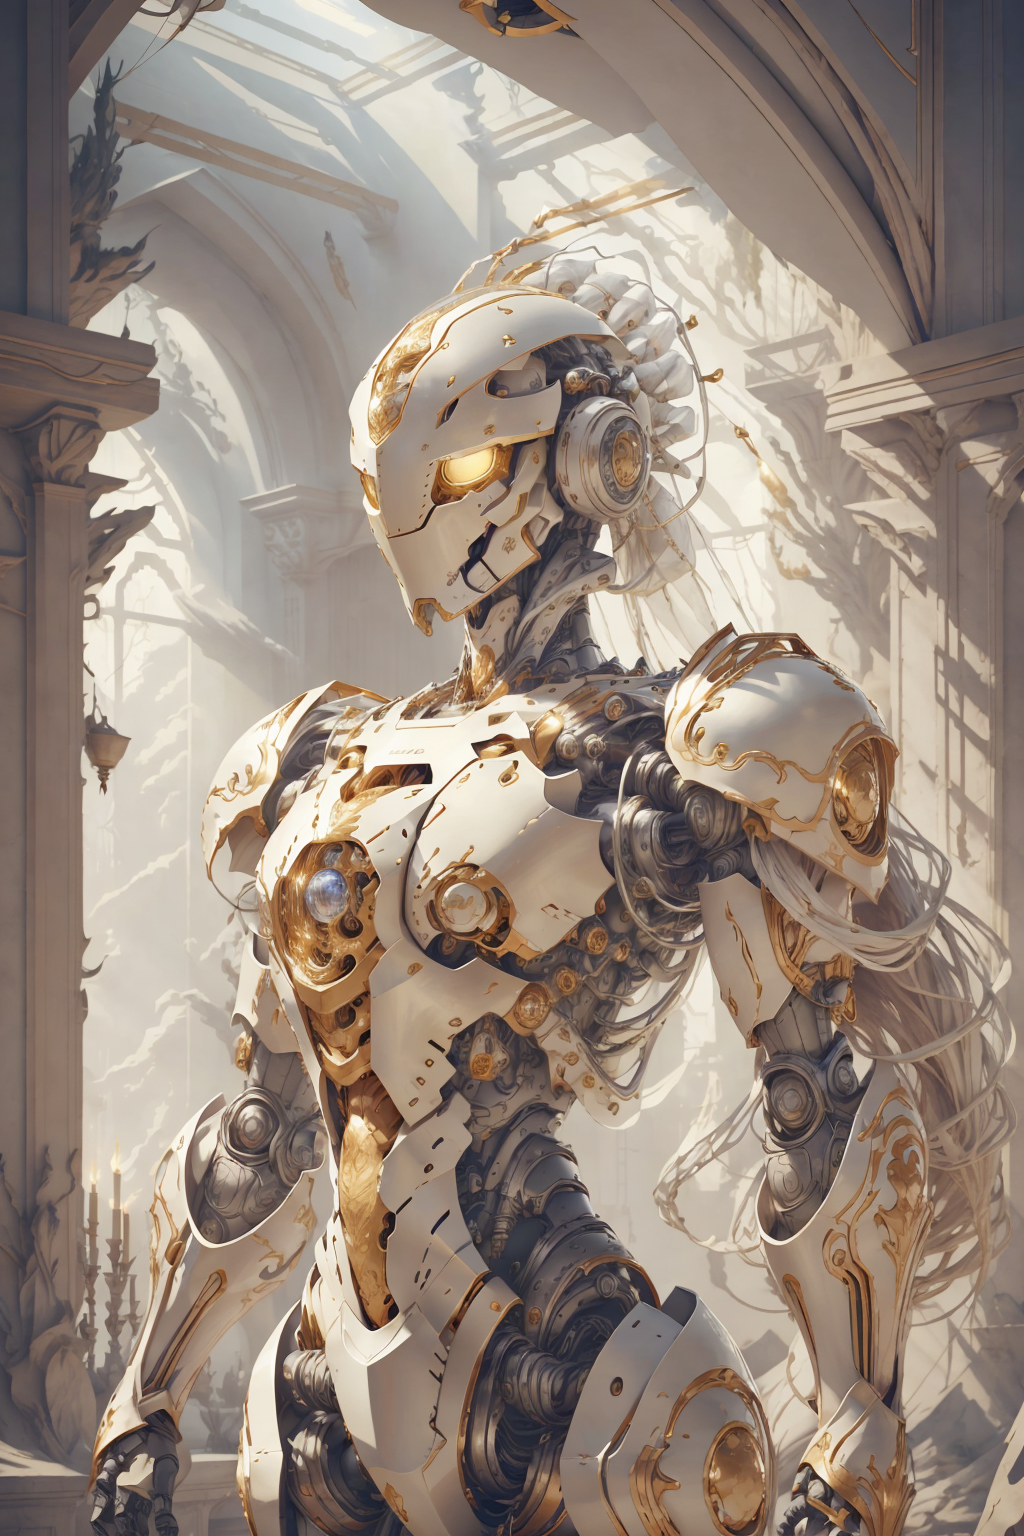 A robotic figure with gold and white armor, standing in a white room.